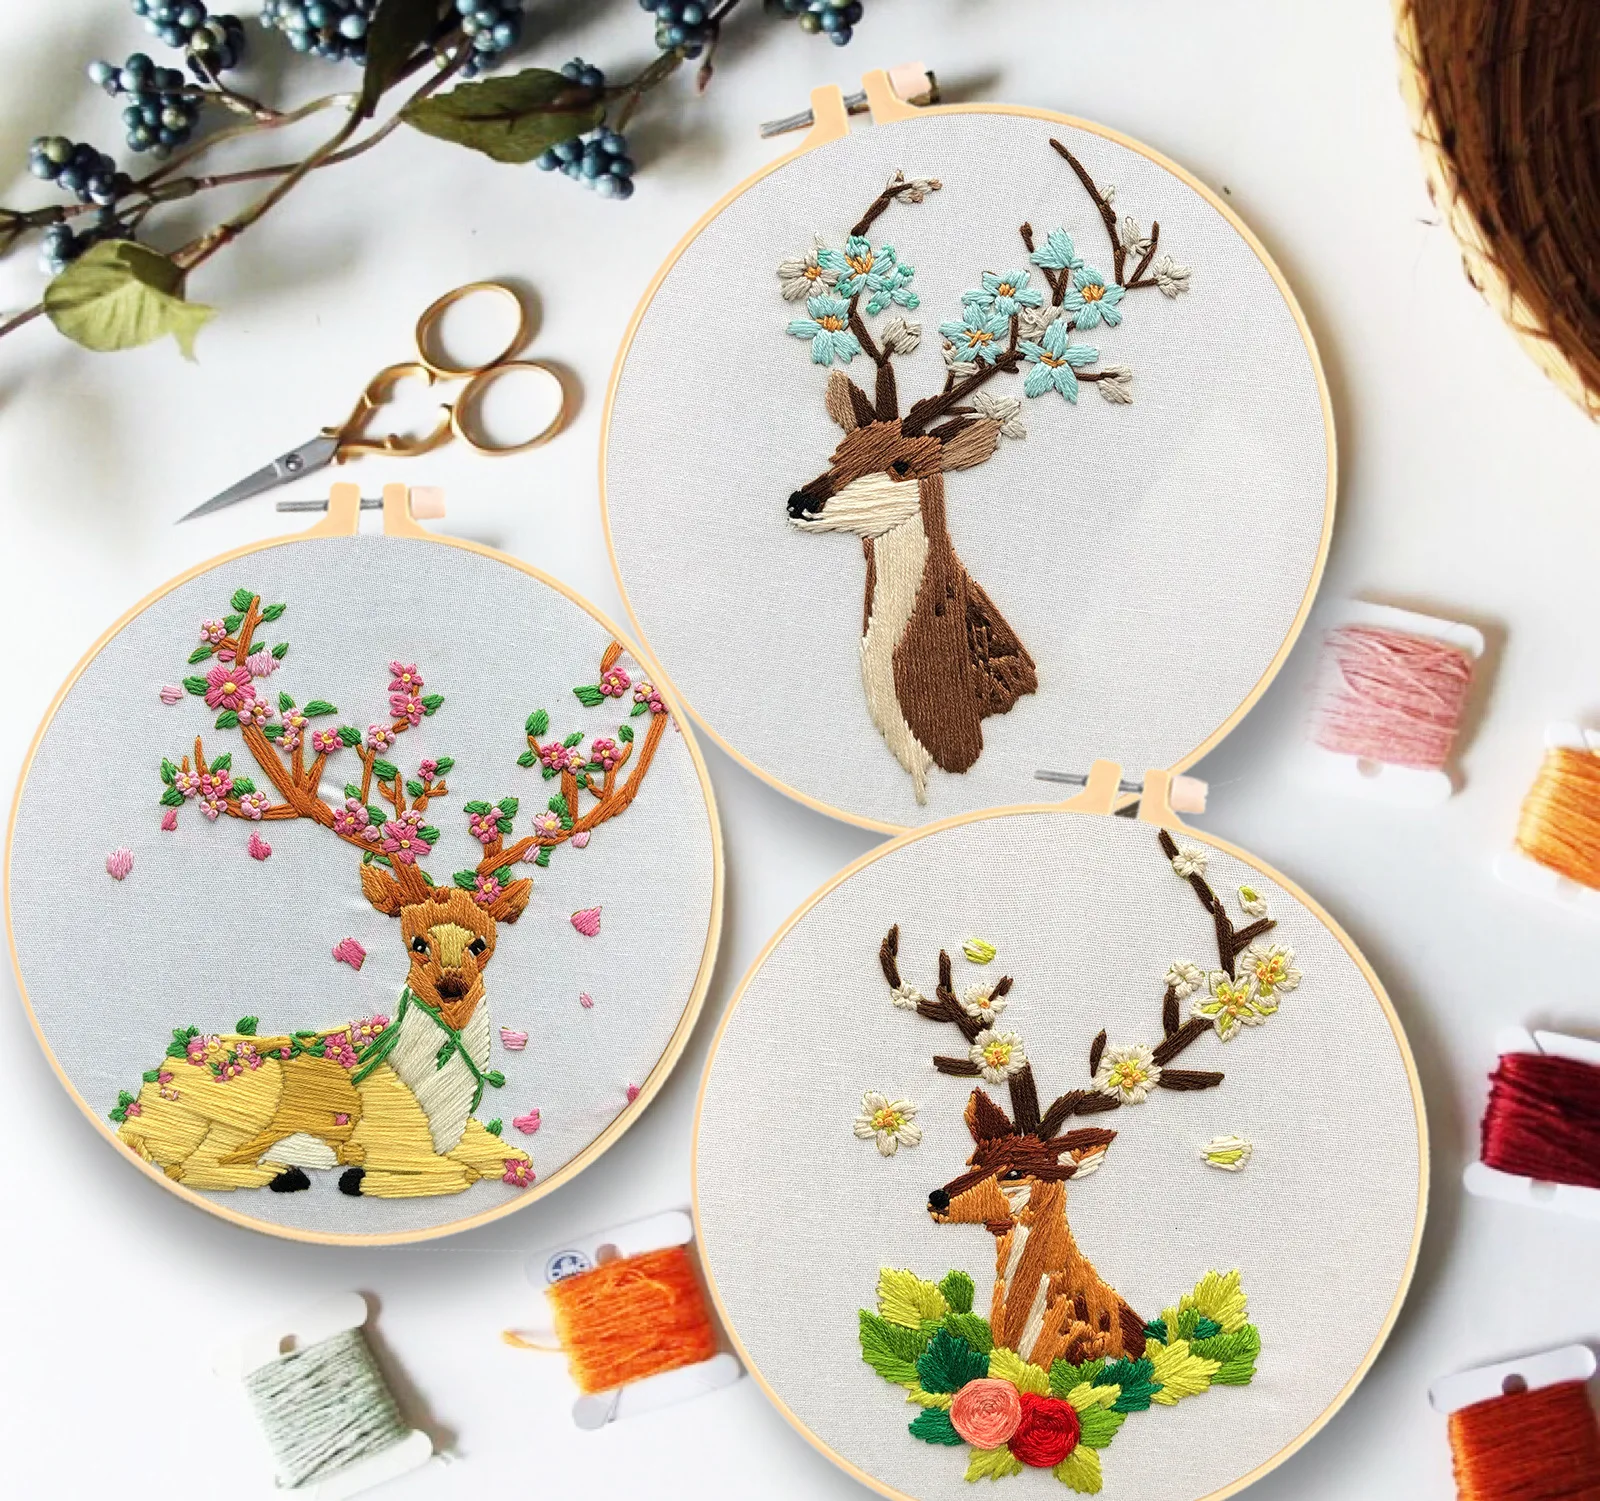 Elk Pattern Diy Sewing Craft Kits for Beginner Needlework Cross Stitch Kit Creative Gift Embroidery Fabric Threads Material Bag